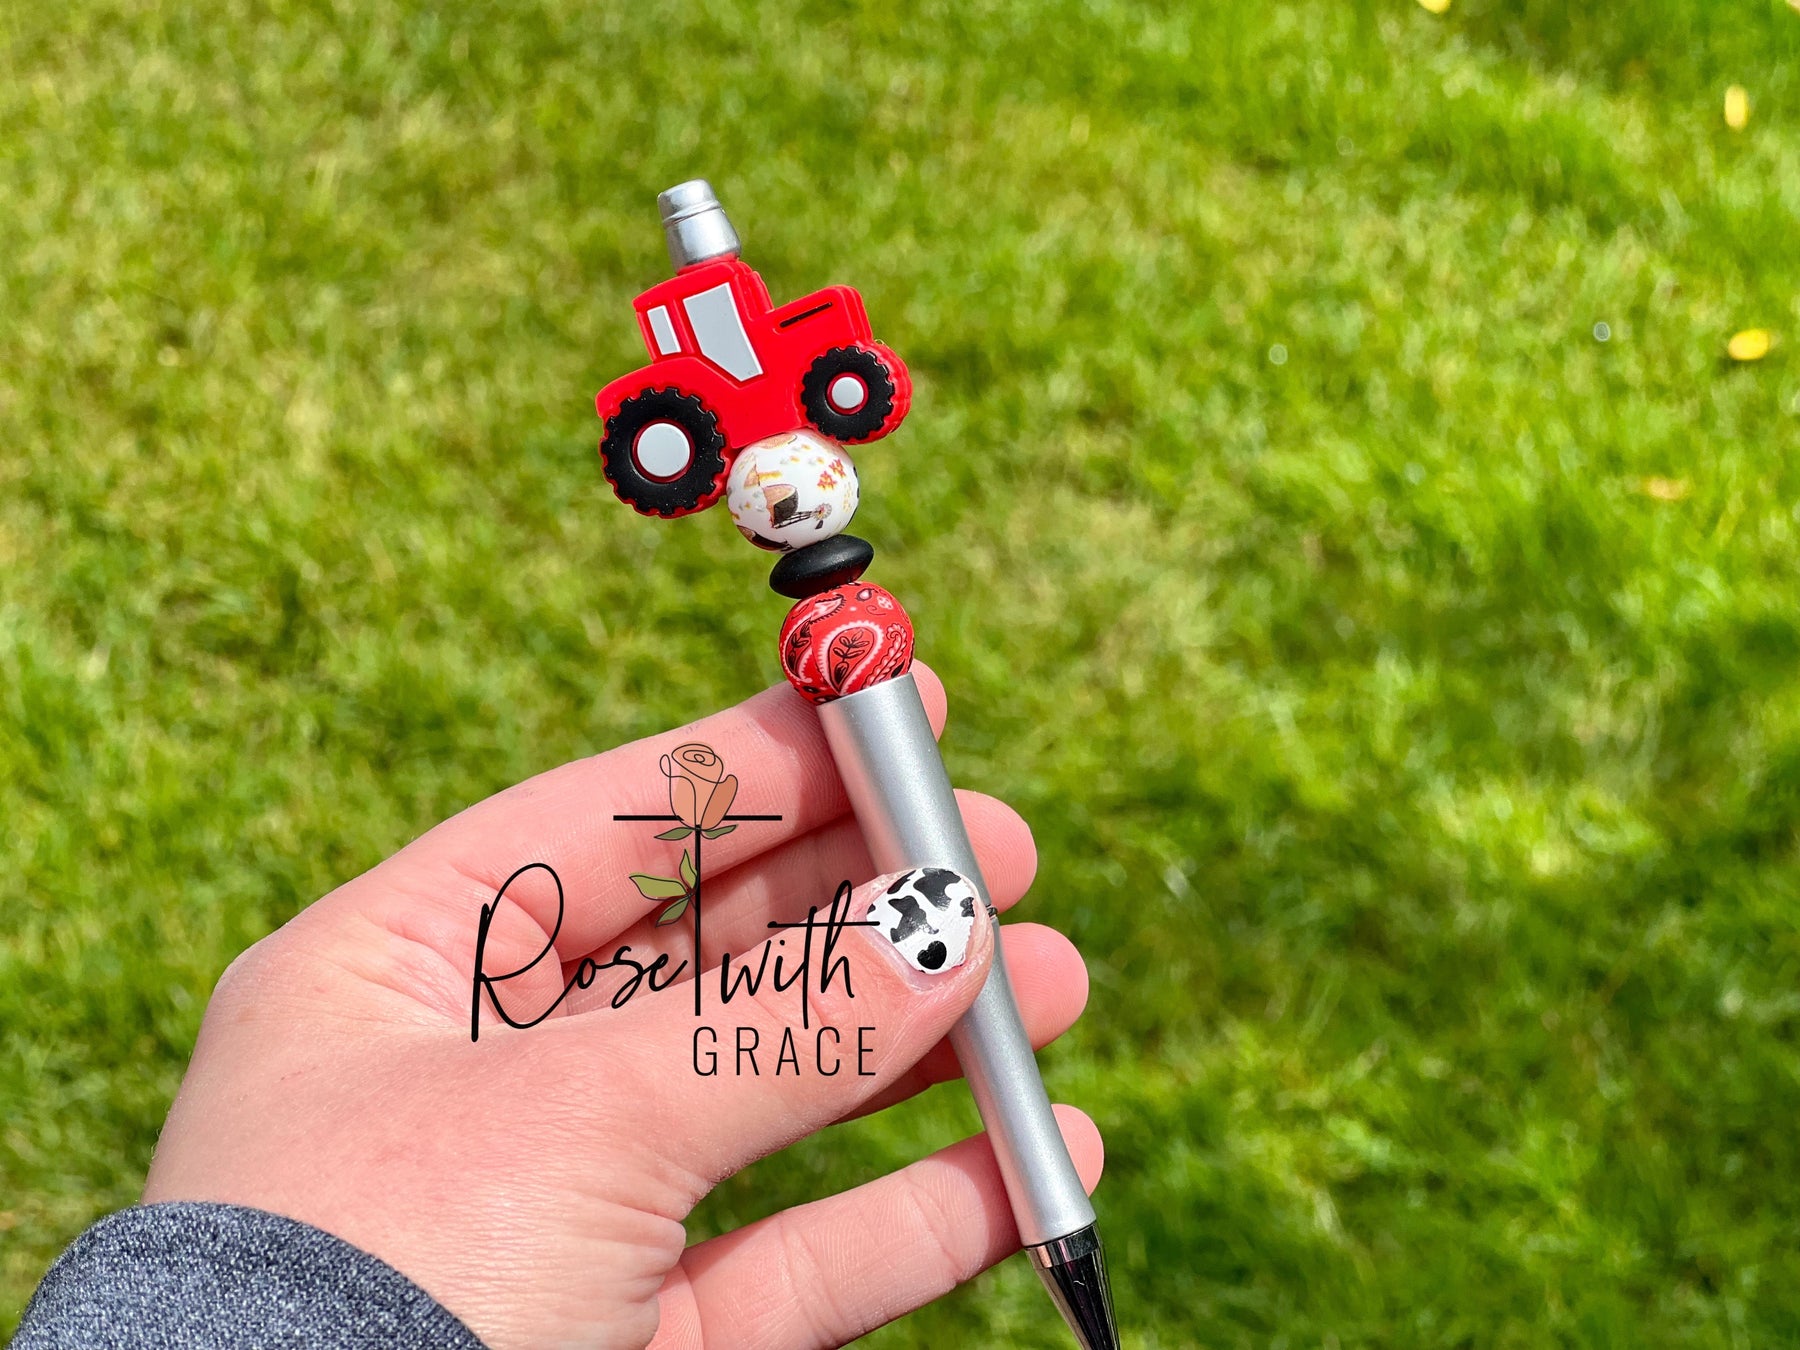 TRACTOR PEN Rose with Grace LLC